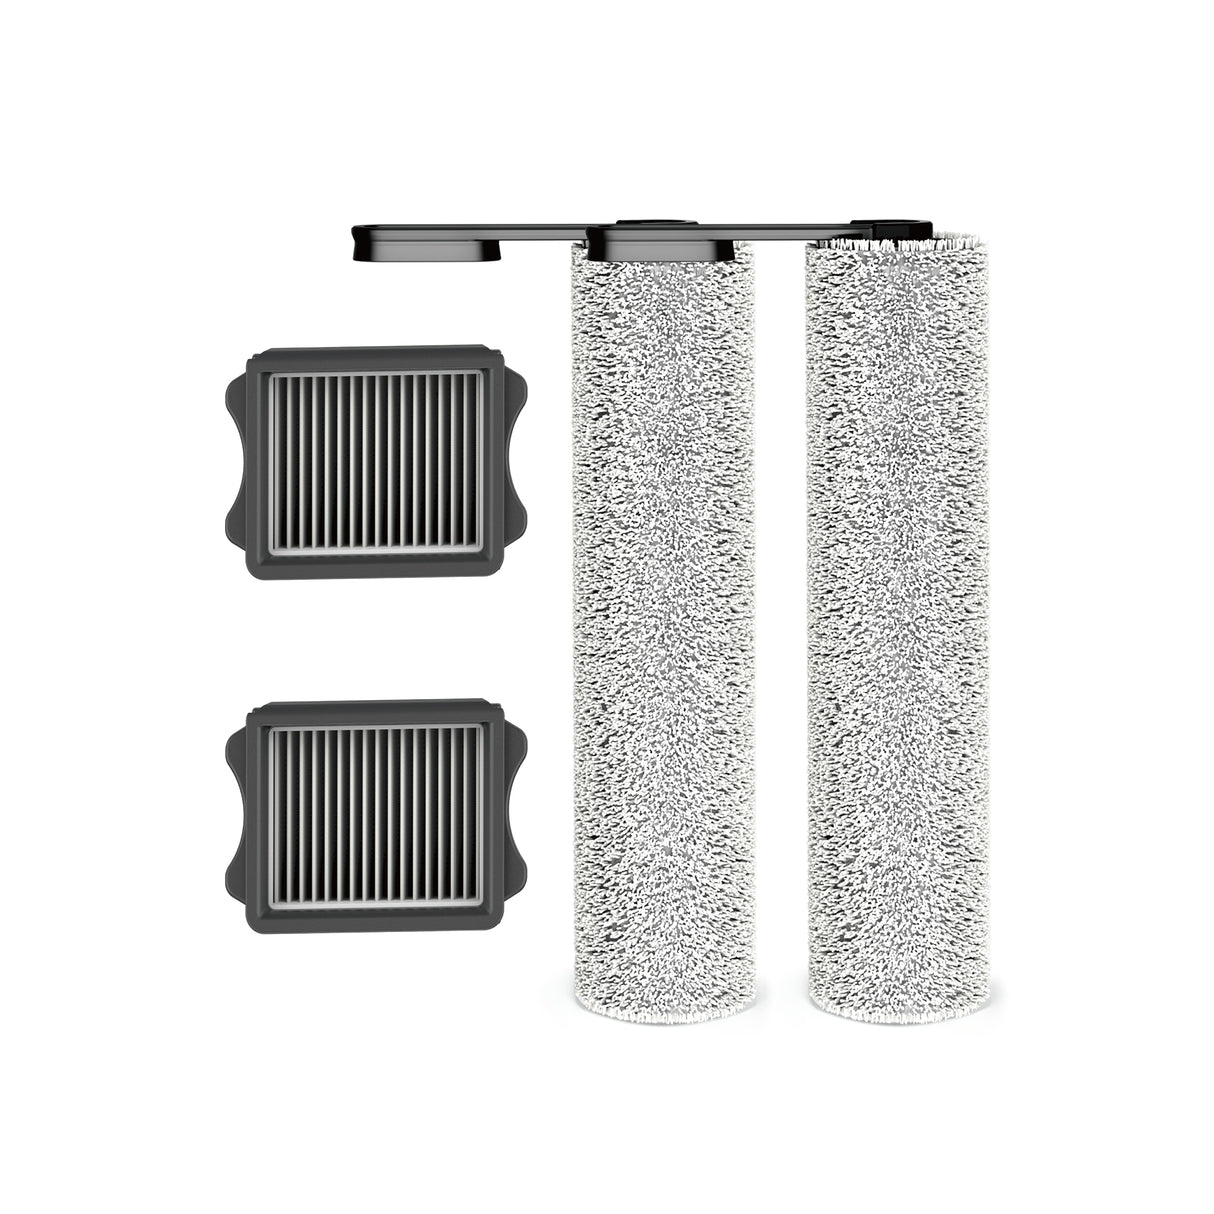 Tineco FLOOR ONE S7 Pro/ S5 / S5 PRO 2 Replacement Brush Roller Kit-2x Brush Roller & 2x HEPA Assy